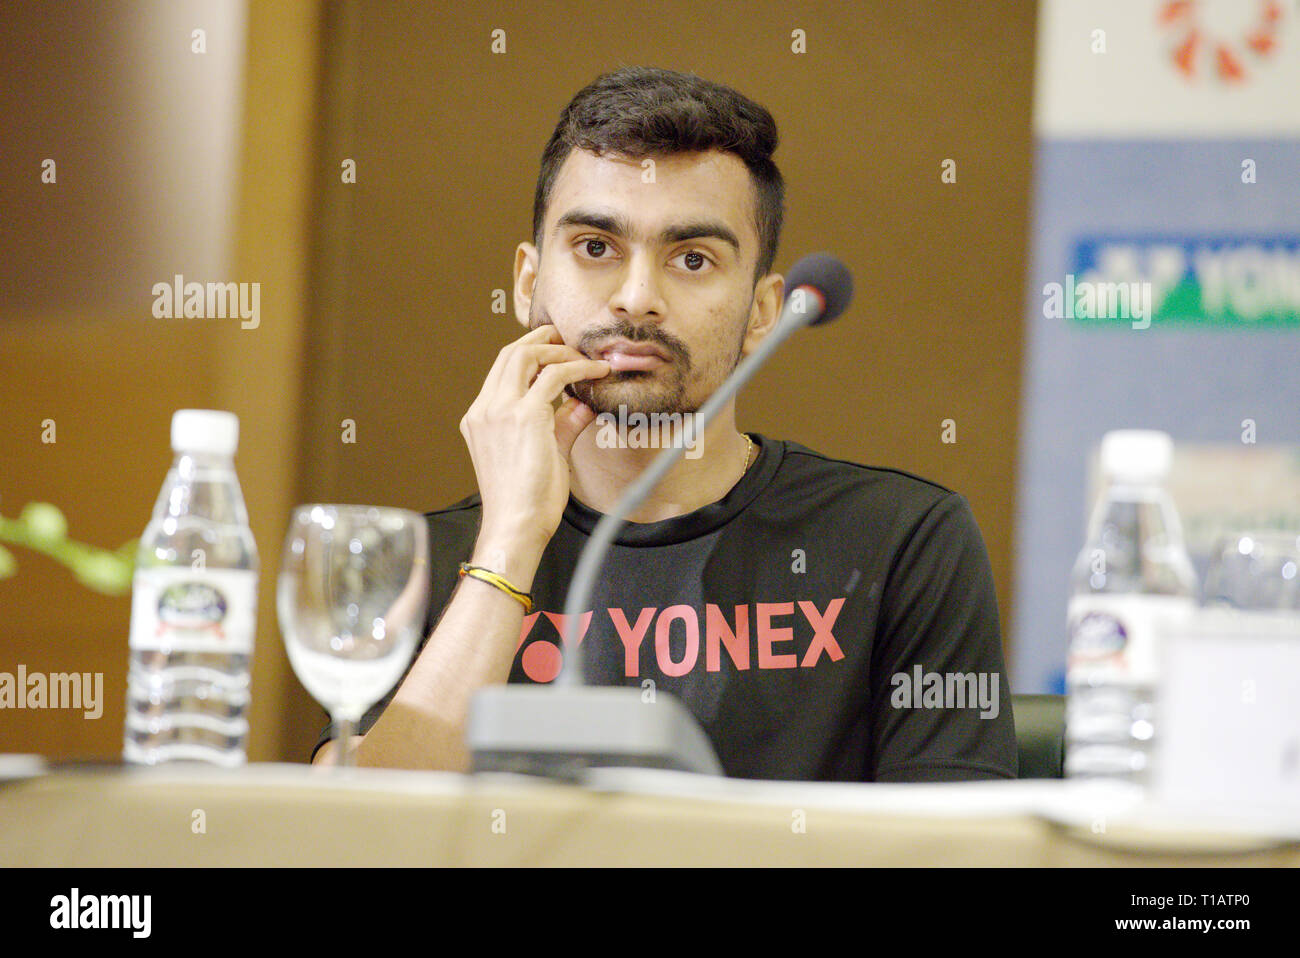 New Delhi, India. 25th March 2019. Sameer Verma of India at the press conference during the Yonex Sunrise India Open 2019 Preview in New Delhi, India. Credit: Karunesh Johri/Alamy Live News Stock Photo